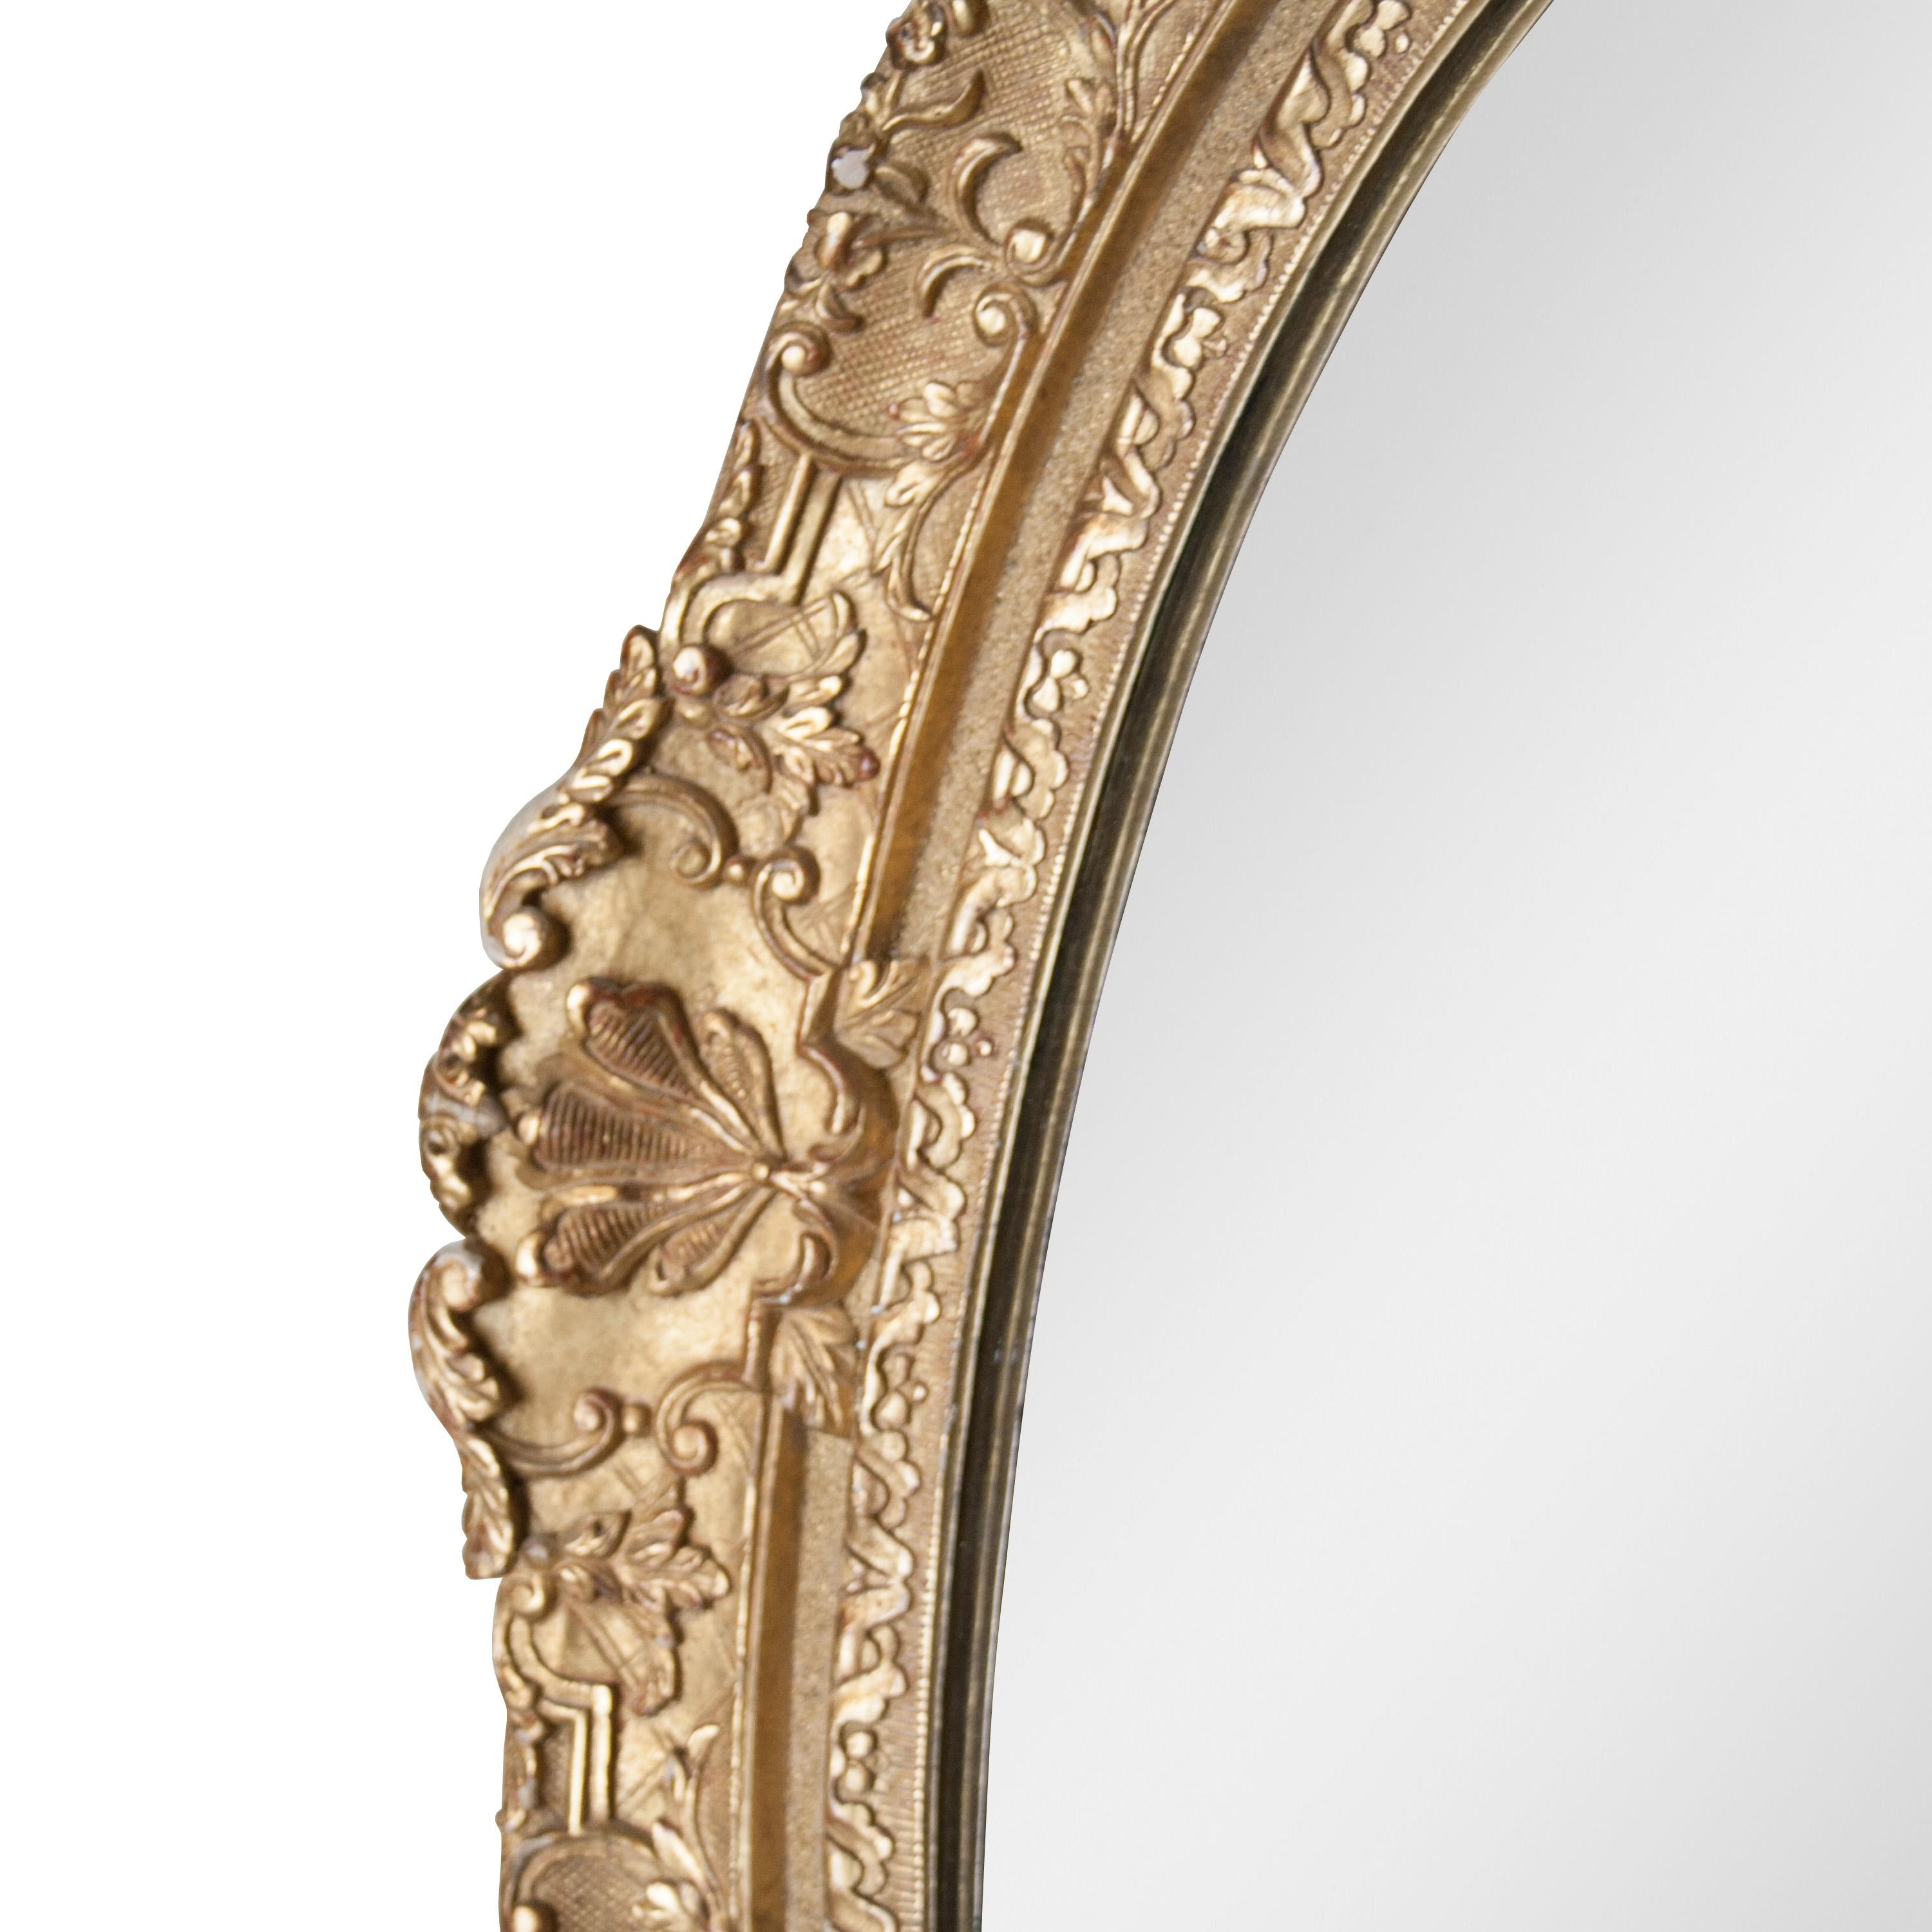 Neoclassical Empire handcrafted mirror. Oval shaped hand carved wooden structure with gold foil finish.
 